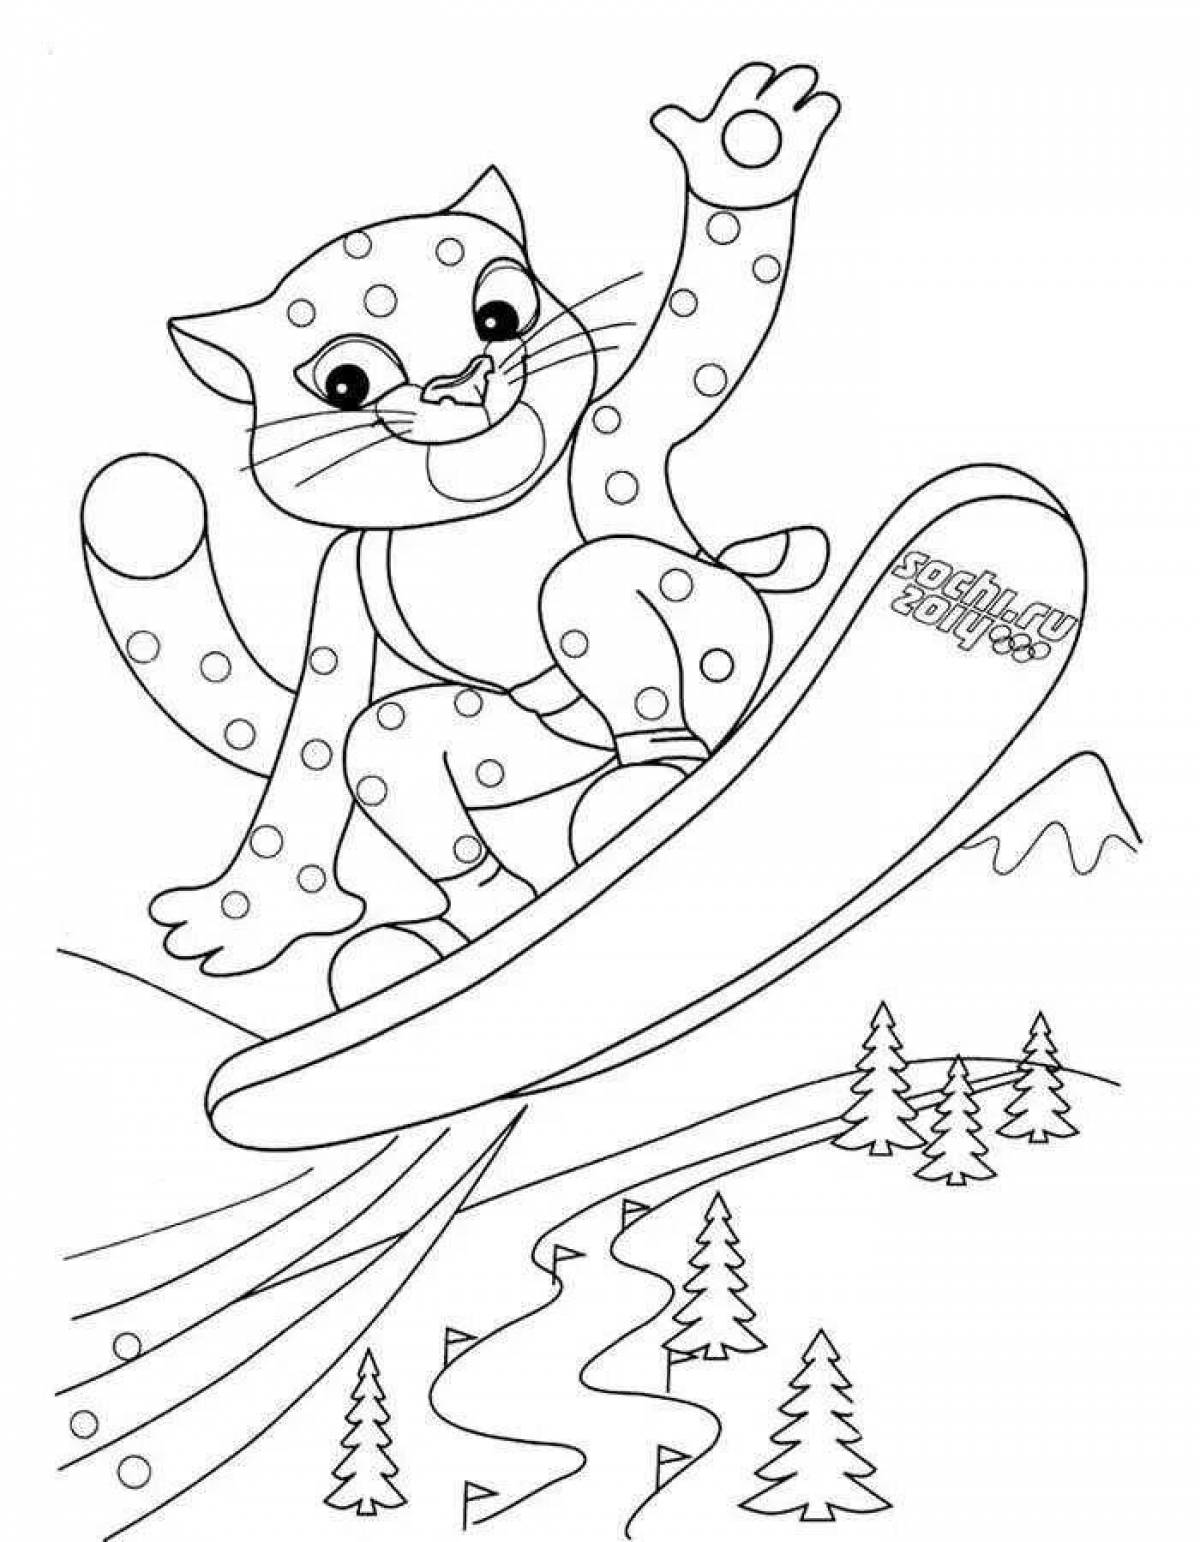 Great winter olympic sports coloring book